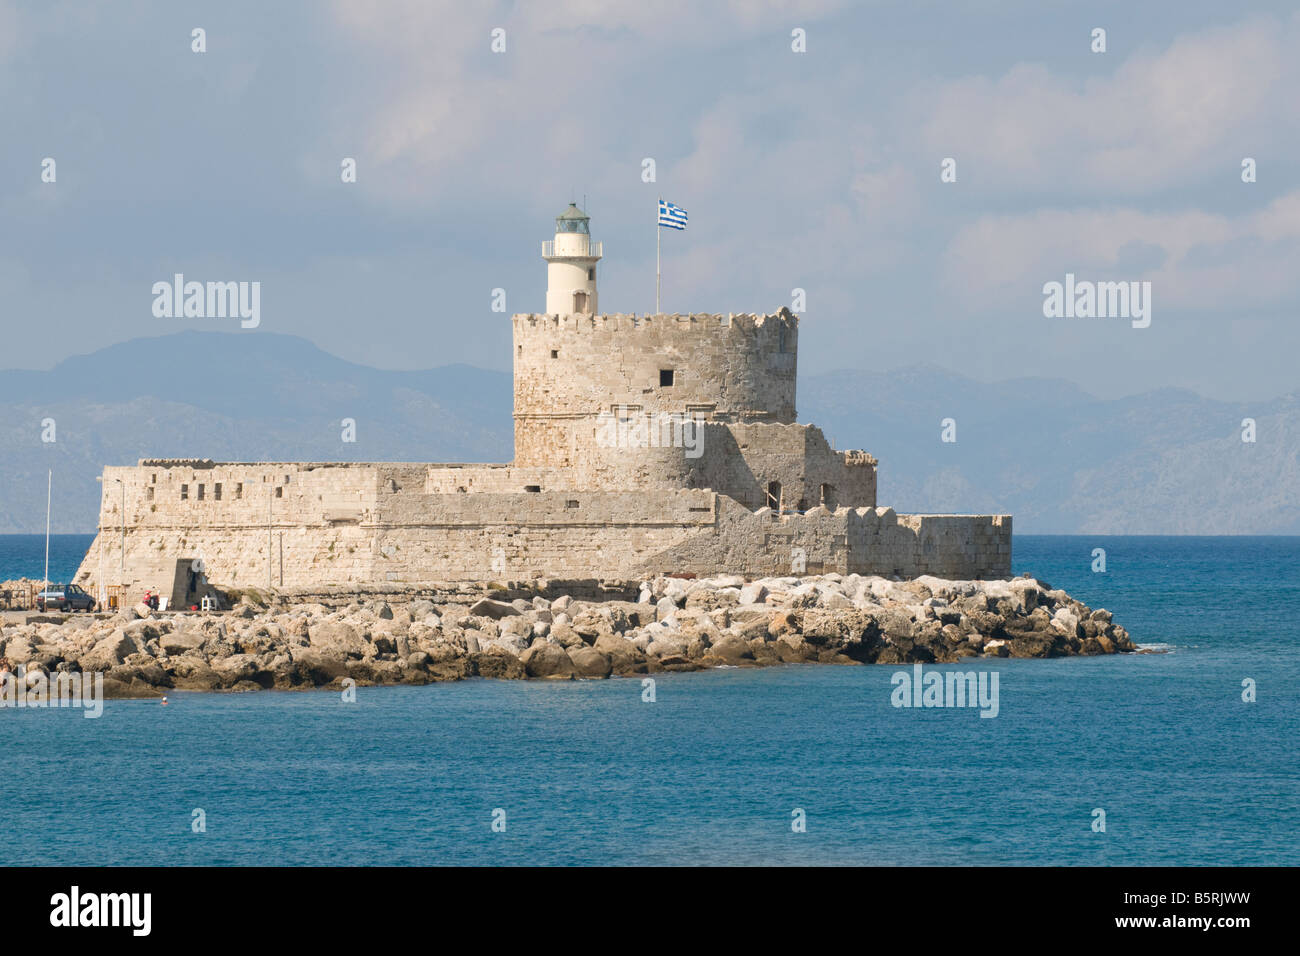 St Nicholas Lighthouse in Mandraki Harbour, Rhodes, Greece, flying the Greek flag and with the coast of Turkey in the background Stock Photo